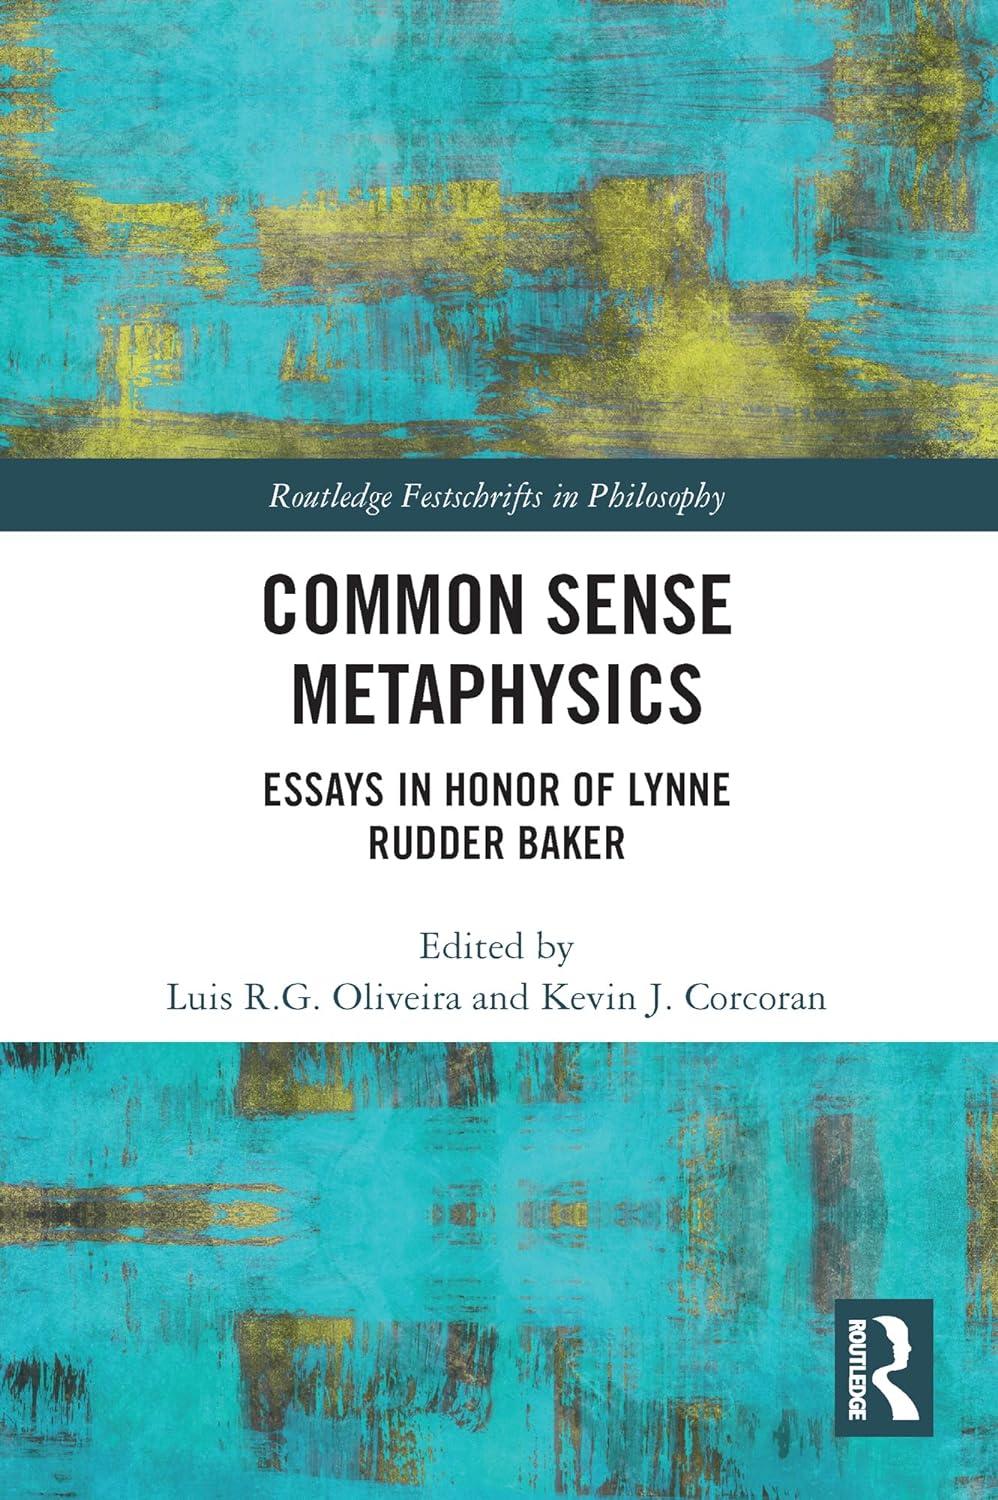 common sense metaphysics essays in honor of lynne rudder baker 1st edition luis oliveira, kevin corcoran